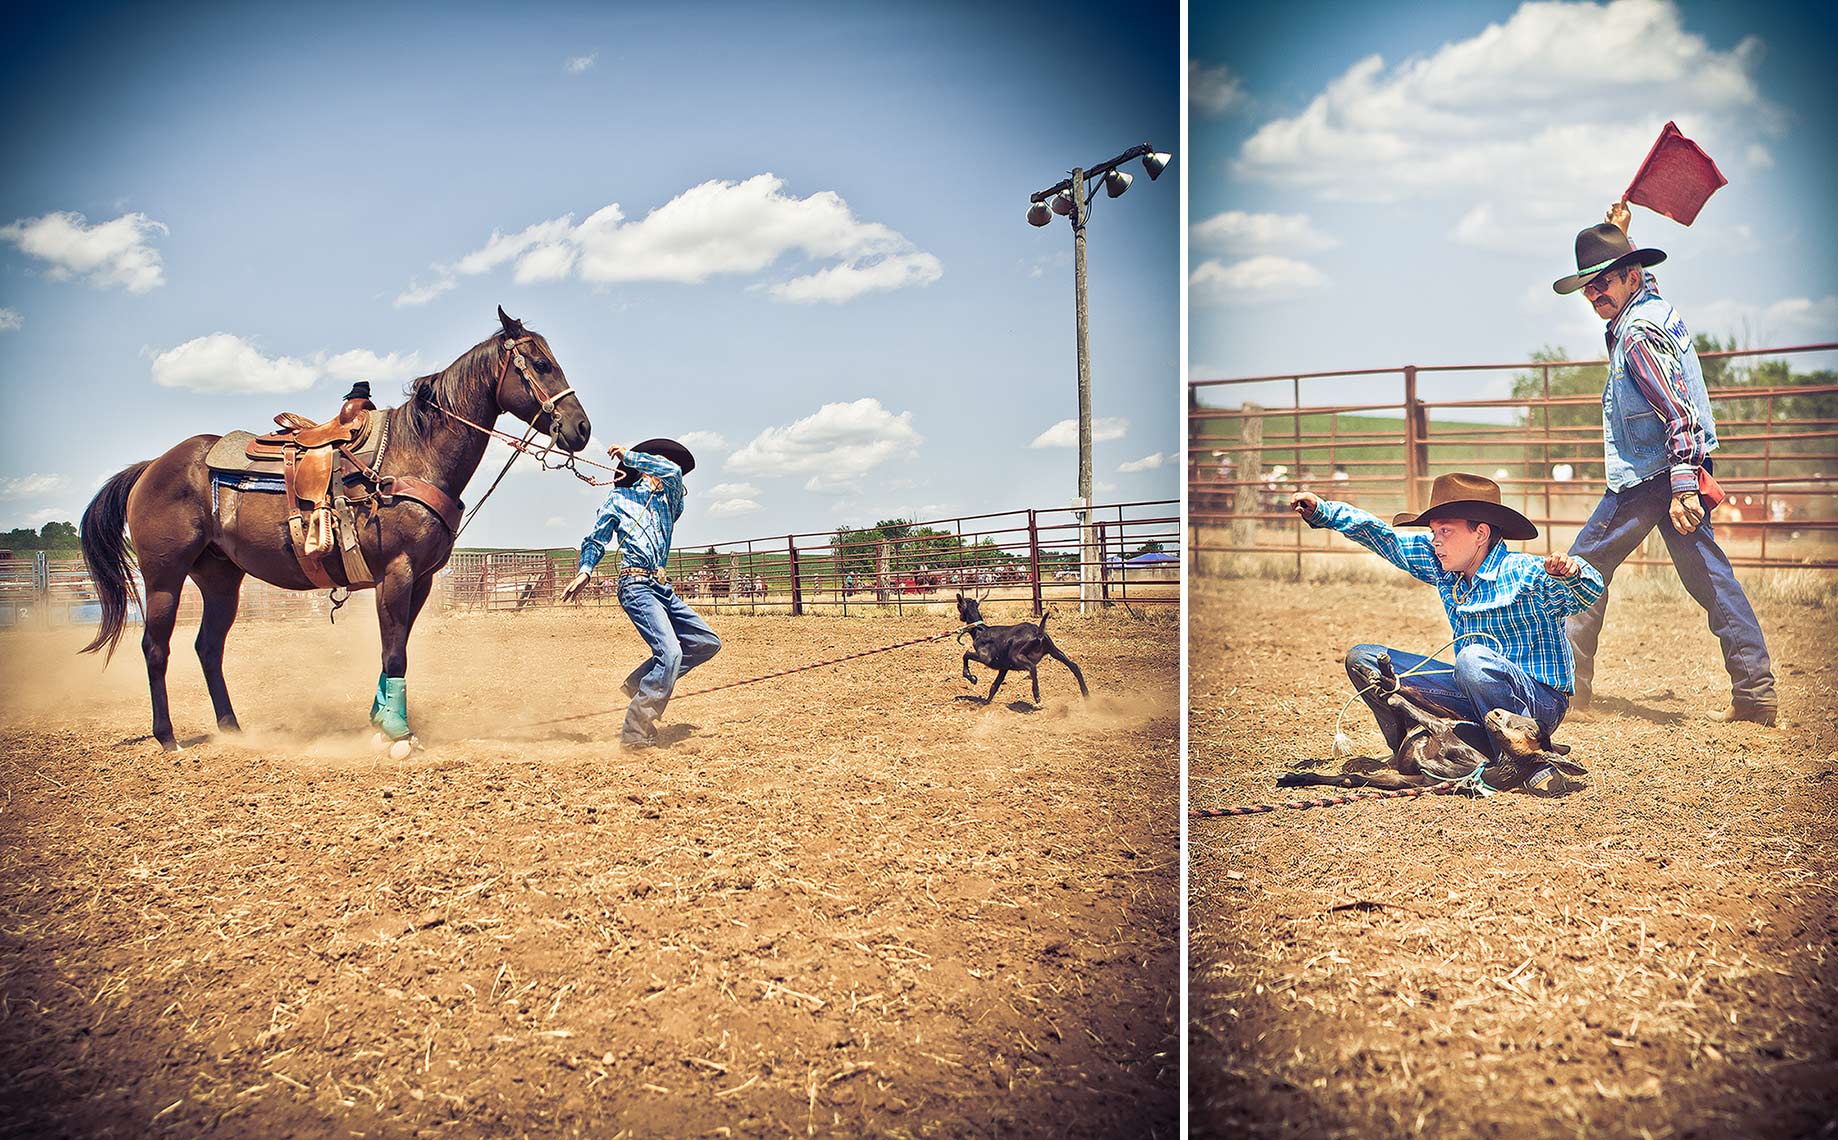  John Sibilski Photography | Trade show photography Chicago LITTLE BRITCHES RODEO tiedup